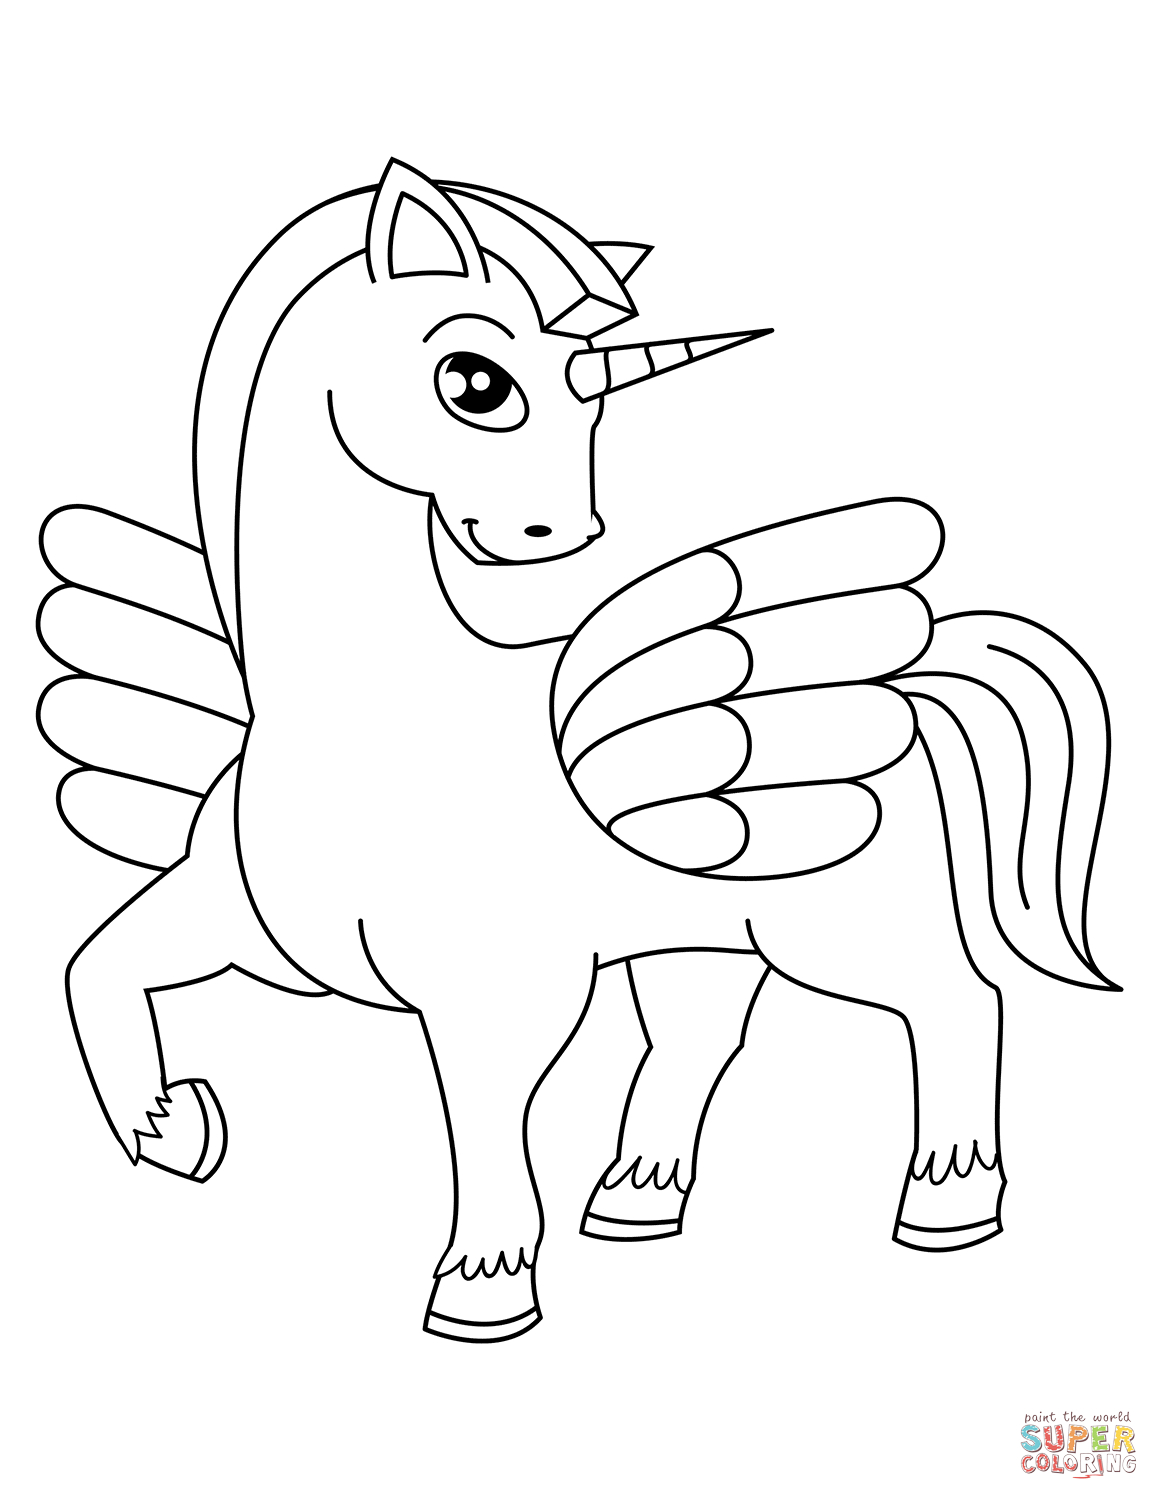 Unicorno Coloring Pages Unicorn Coloring Pages Free Coloring Pages